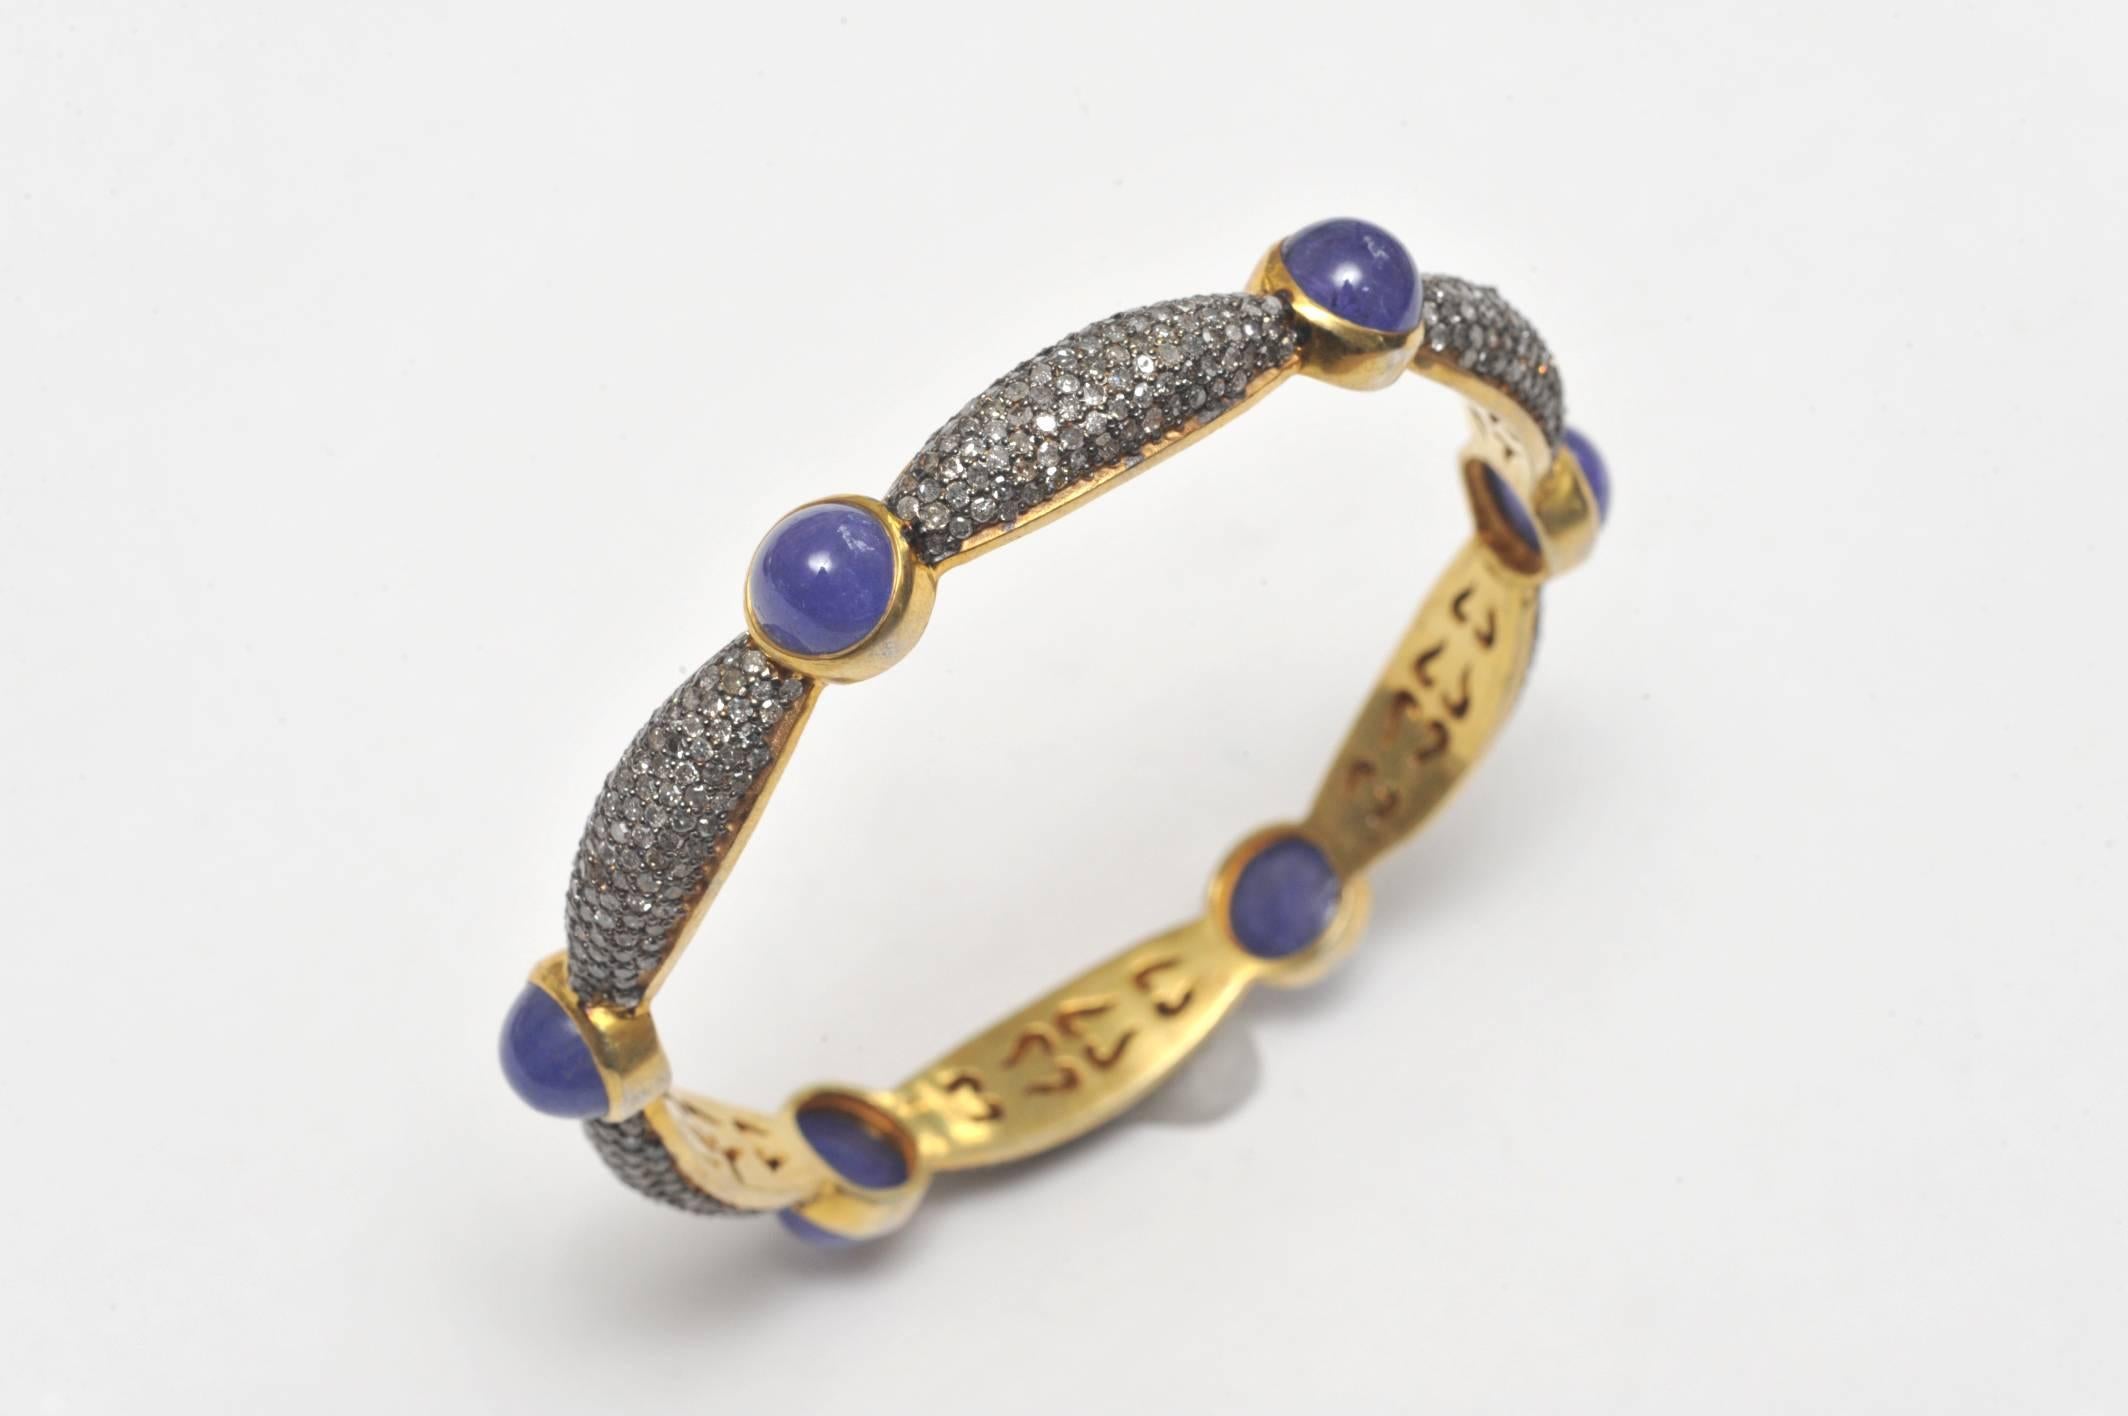 Bangle of cabochon Tanzanites mounted between settings of domed pave` diamonds in sterling.  The bracelet borders in 18K Gold.  Inside circumference is 7.5 inches.;  Tanzanite carat weight is 24.90; diamonds are 7.13 carats.